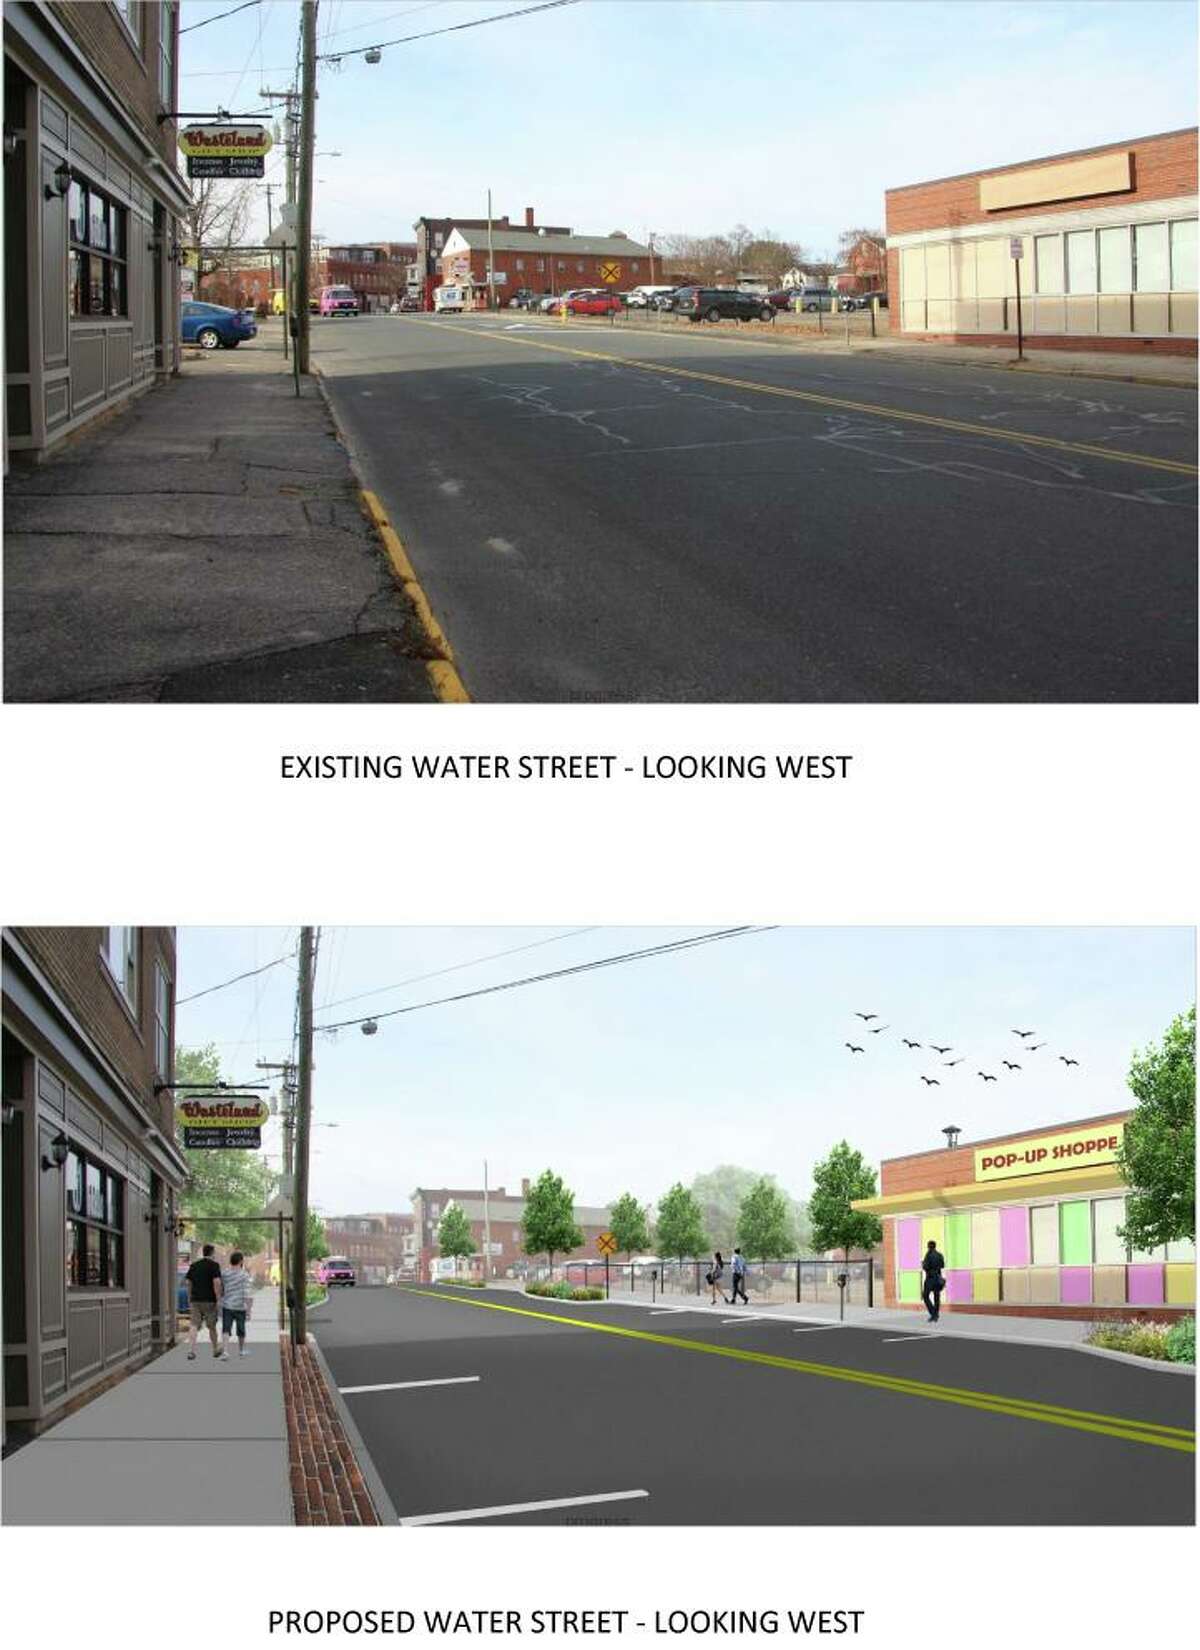 Repairs to Water Street's sidewalks, street improvements and pedestrian safety measures are illustrated in these drawings provided by Torrington's office of economic development, which would become part of a plan that also includes Railroad Station Place, John Street, Church Street and Mason Street. Pictured is a concept design for Water Street, which would be improved with pedestrian safety measures.